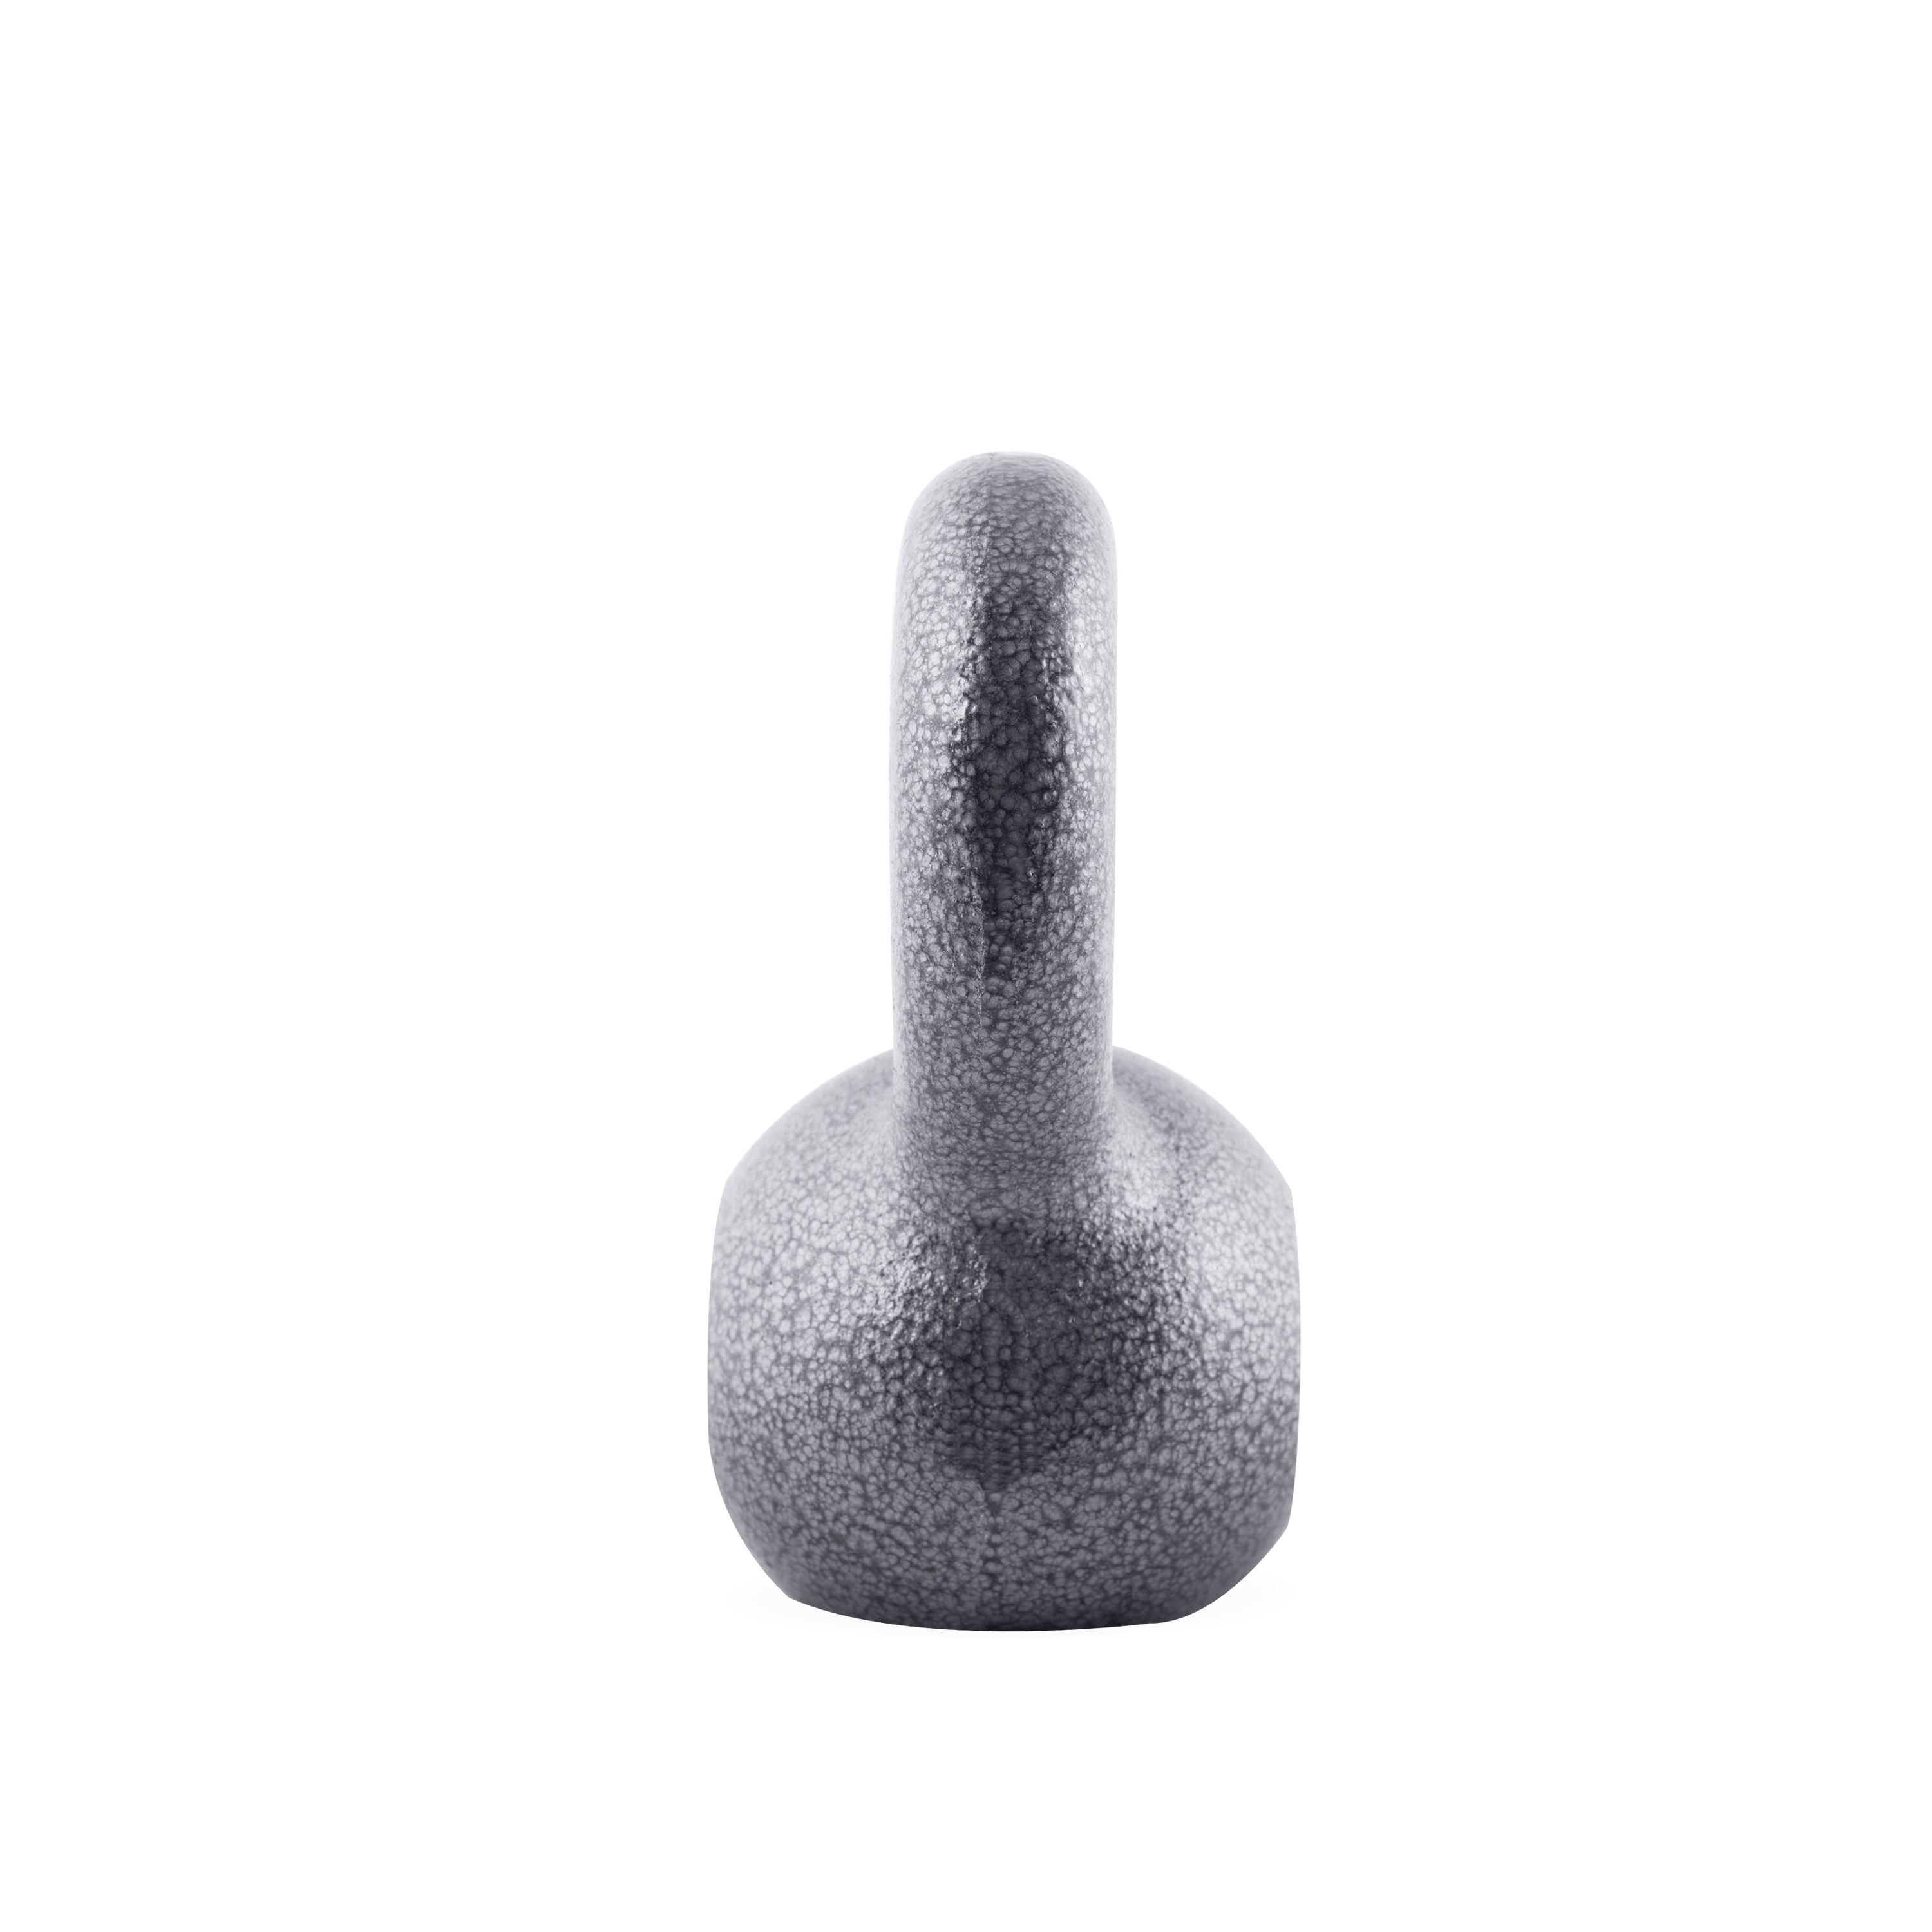 CAP Barbell Cast Iron Kettlebell, Single, 10-80 Pounds - image 4 of 7